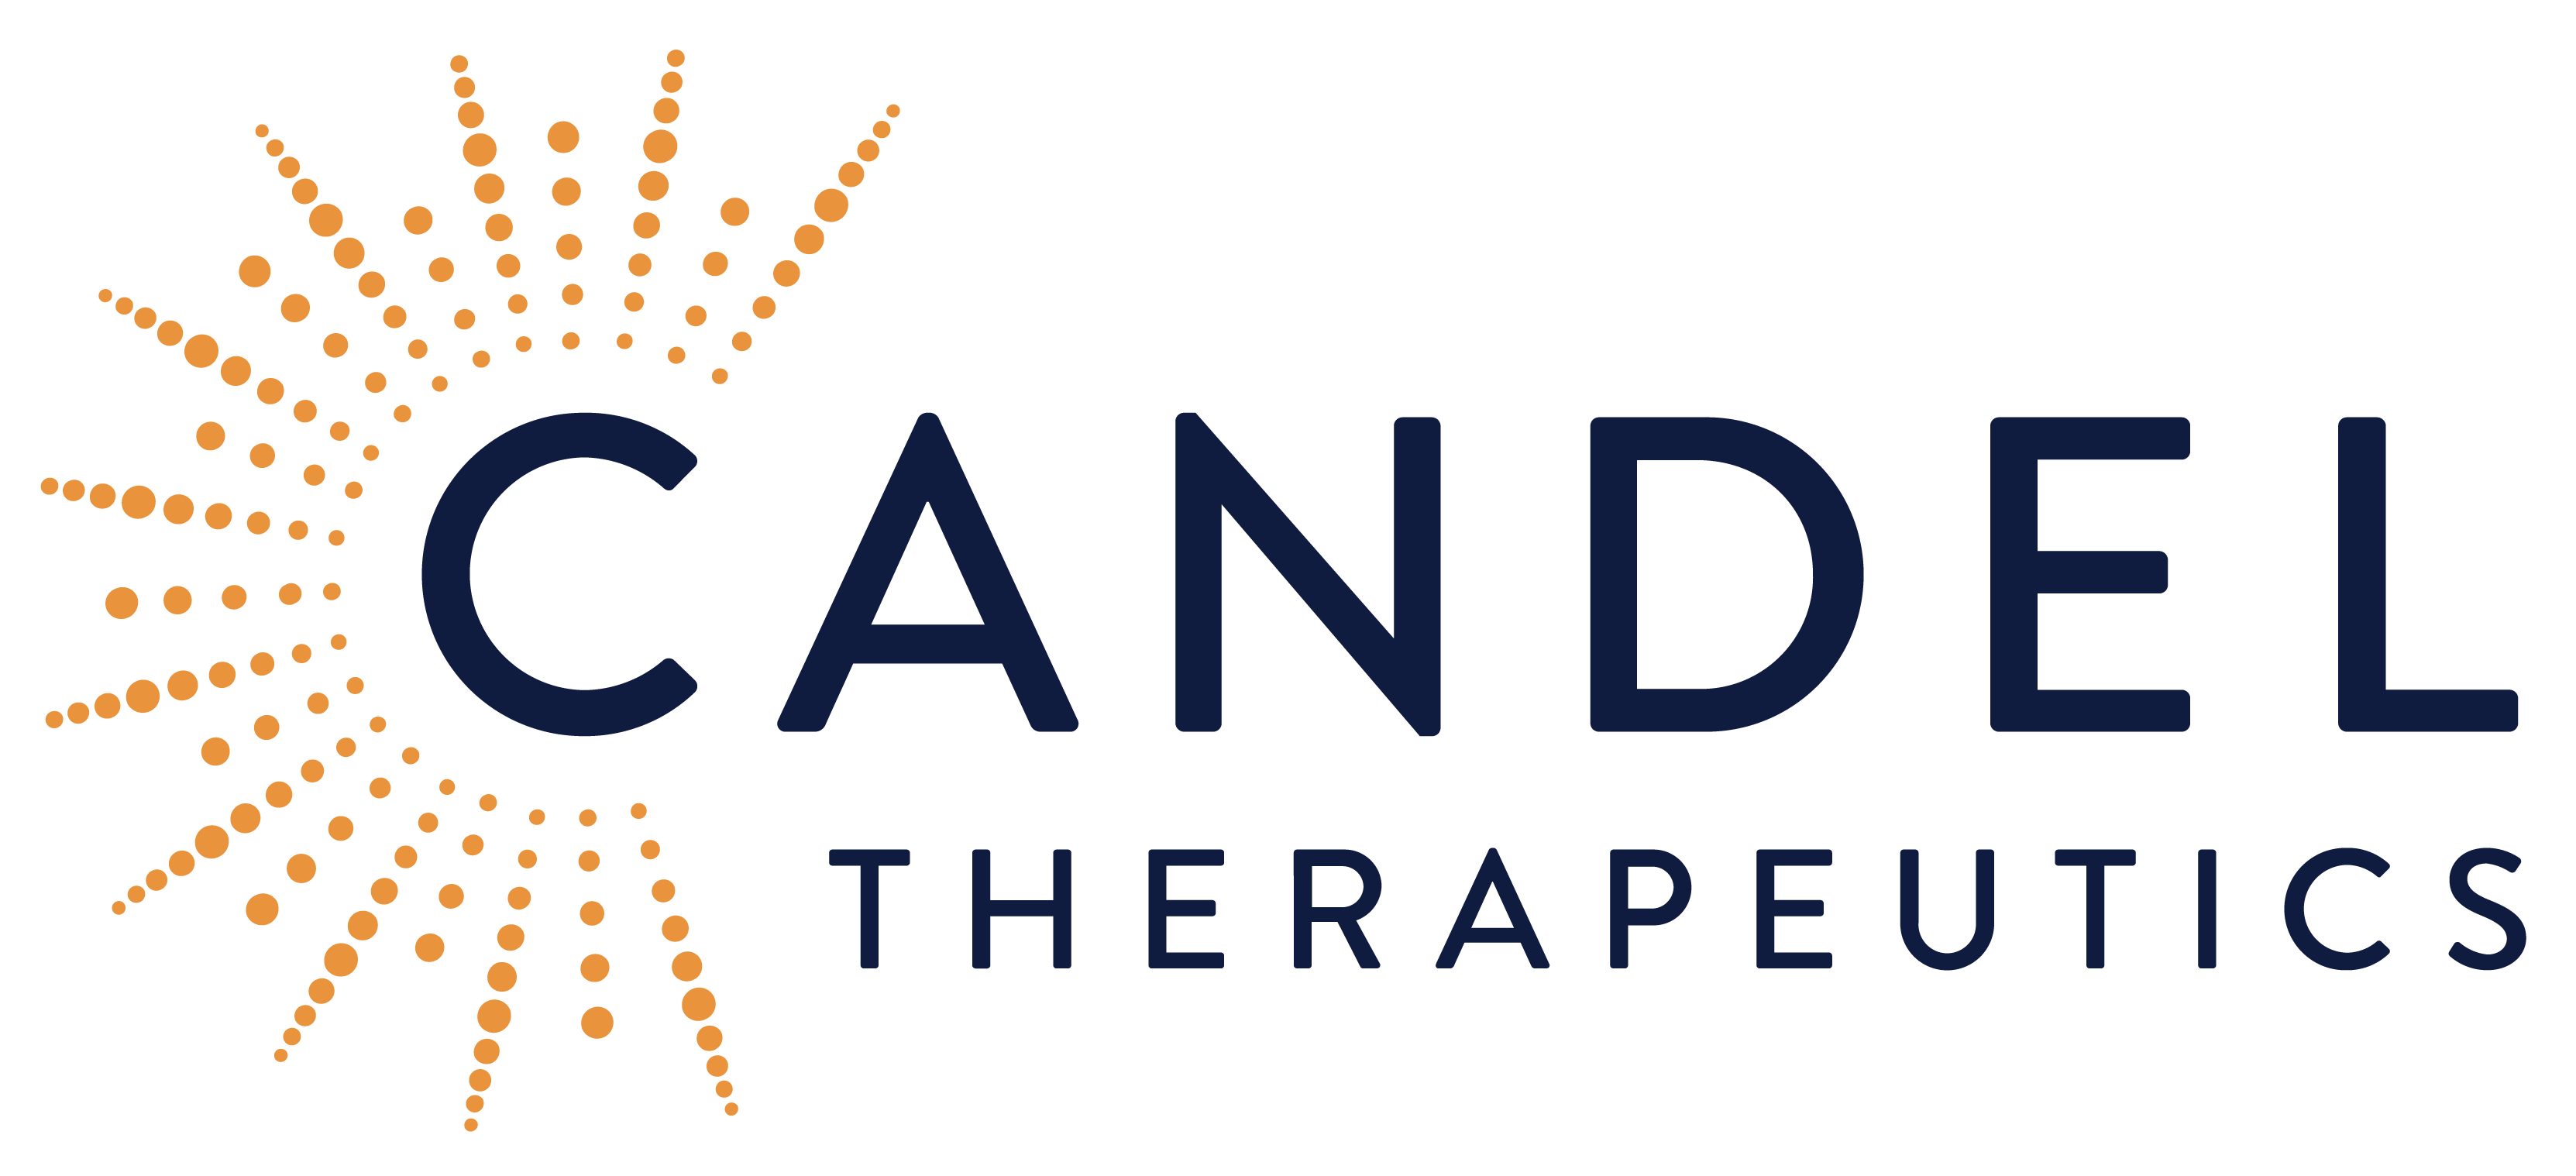 Candel Therapeutics Announces Oral Presentation During the 5th Glioblastoma Drug Development Summit with Update on Phase 1b Clinical Trial of CAN-3110 in Recurrent High-Grade Glioma